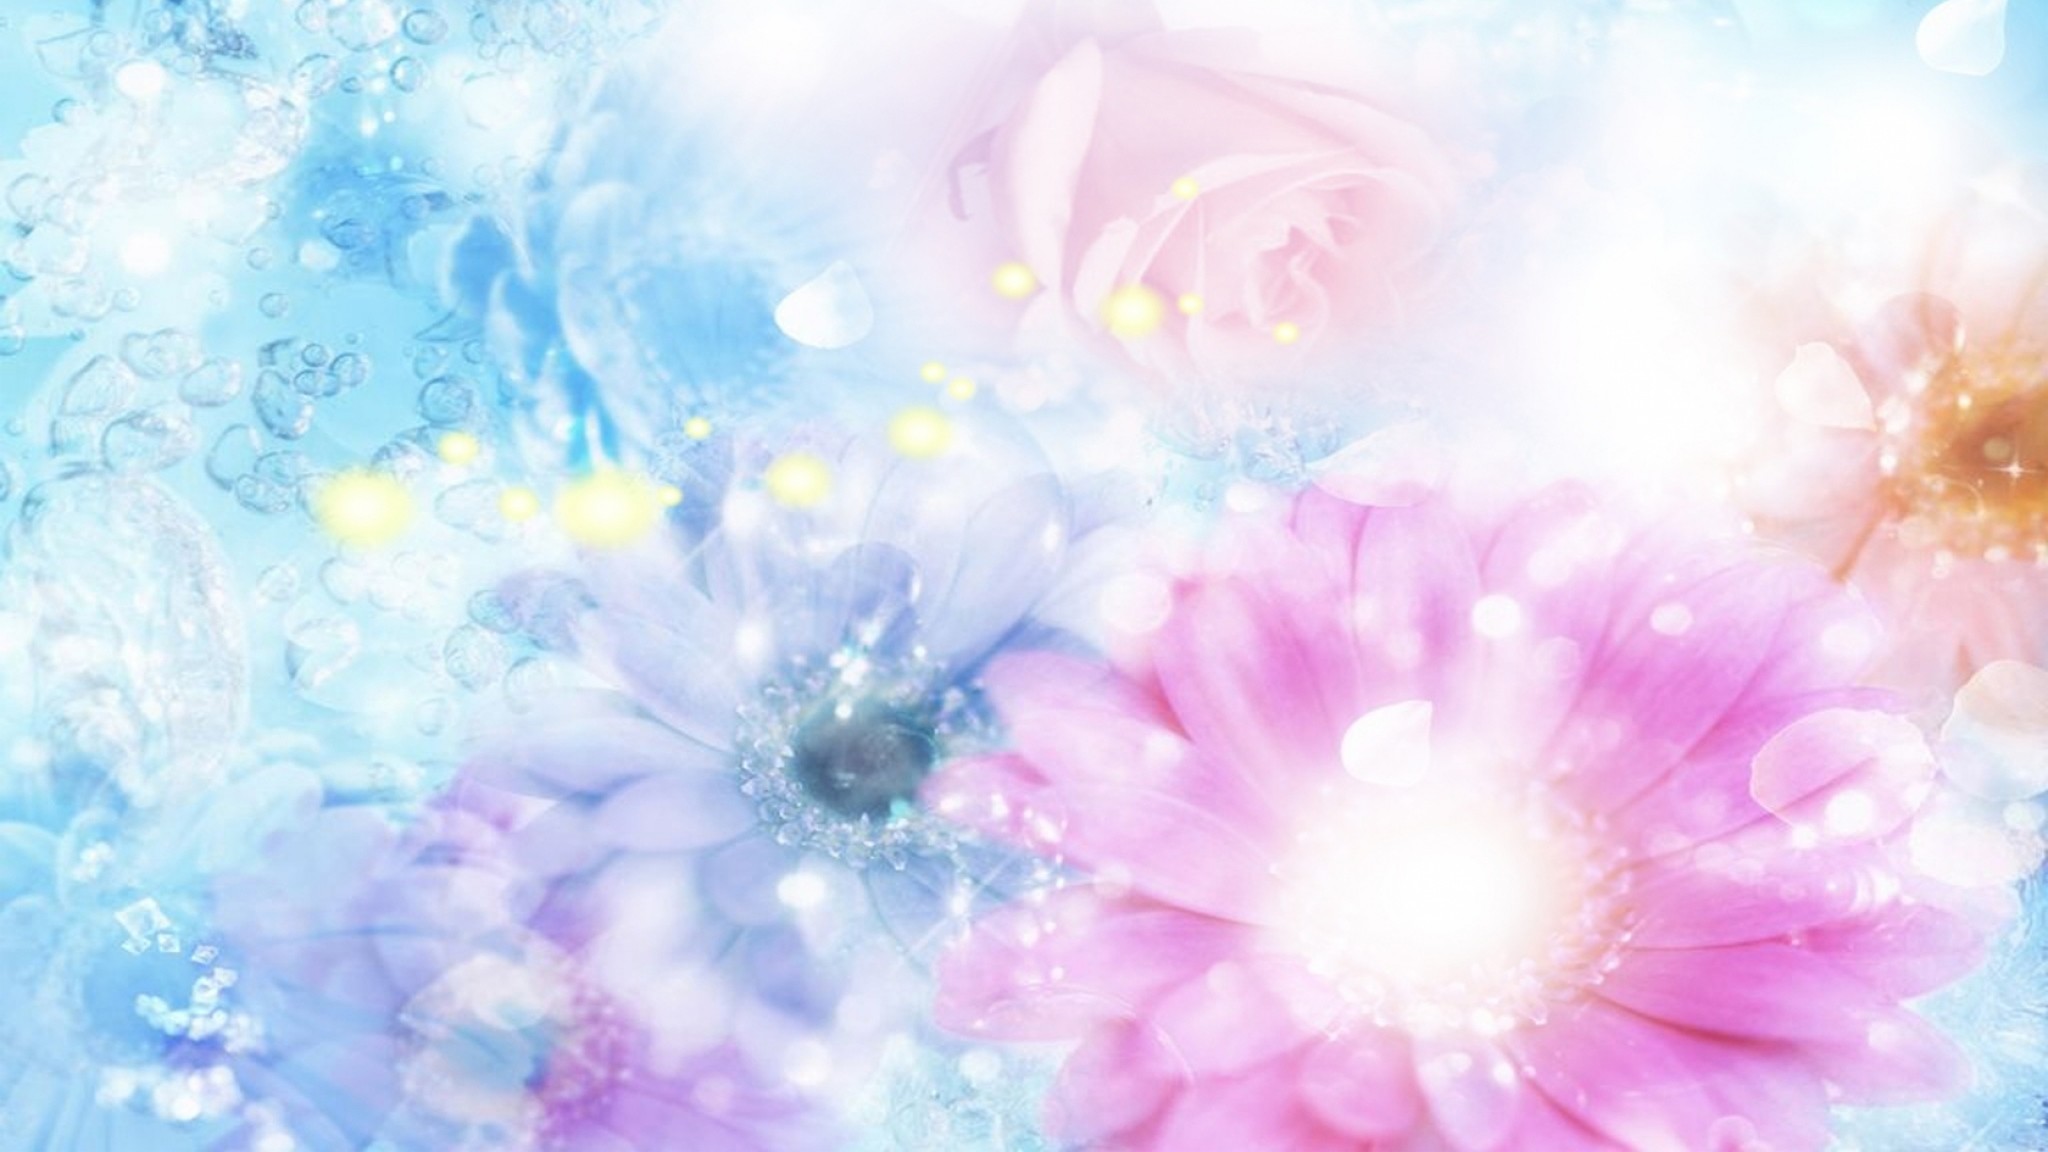 Preview wallpaper pink, blue, flowers, blurred, background, effects  2048×1152